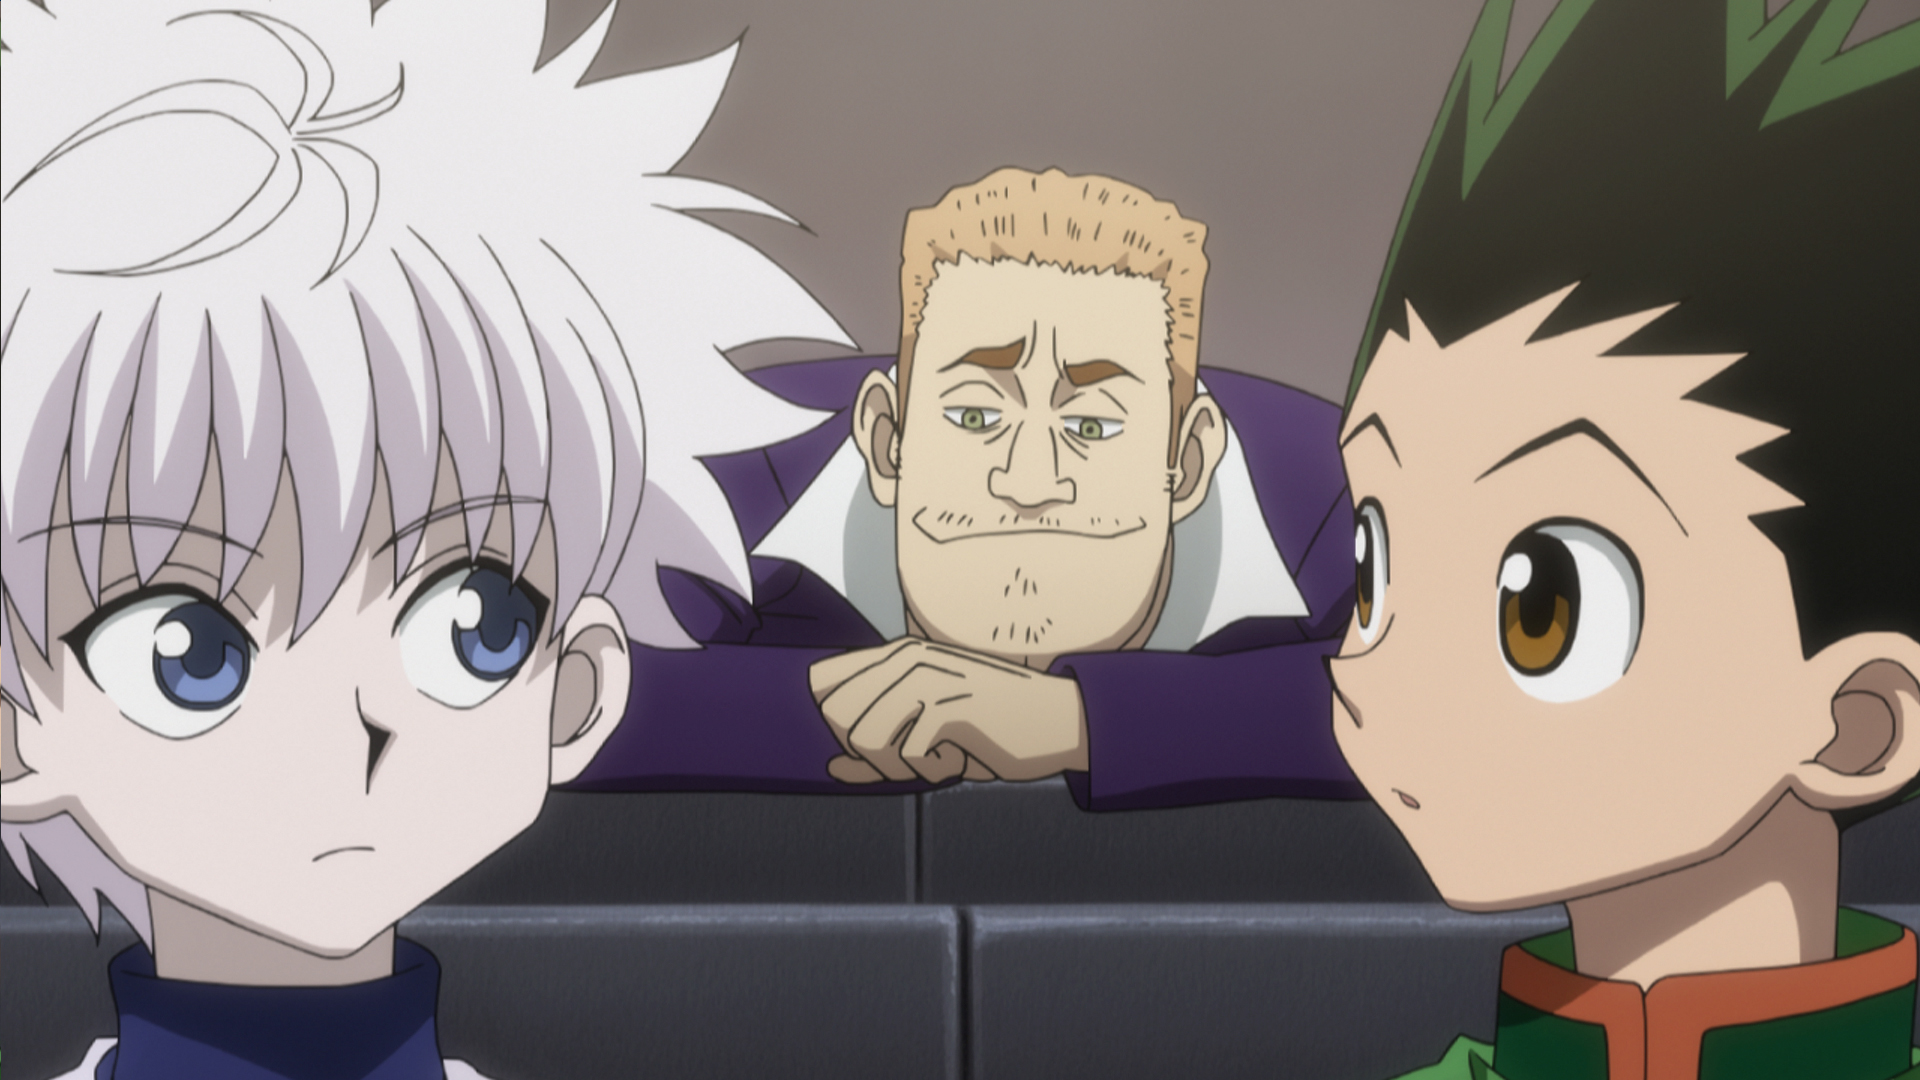 all hunter x hunter english dubbed episodes